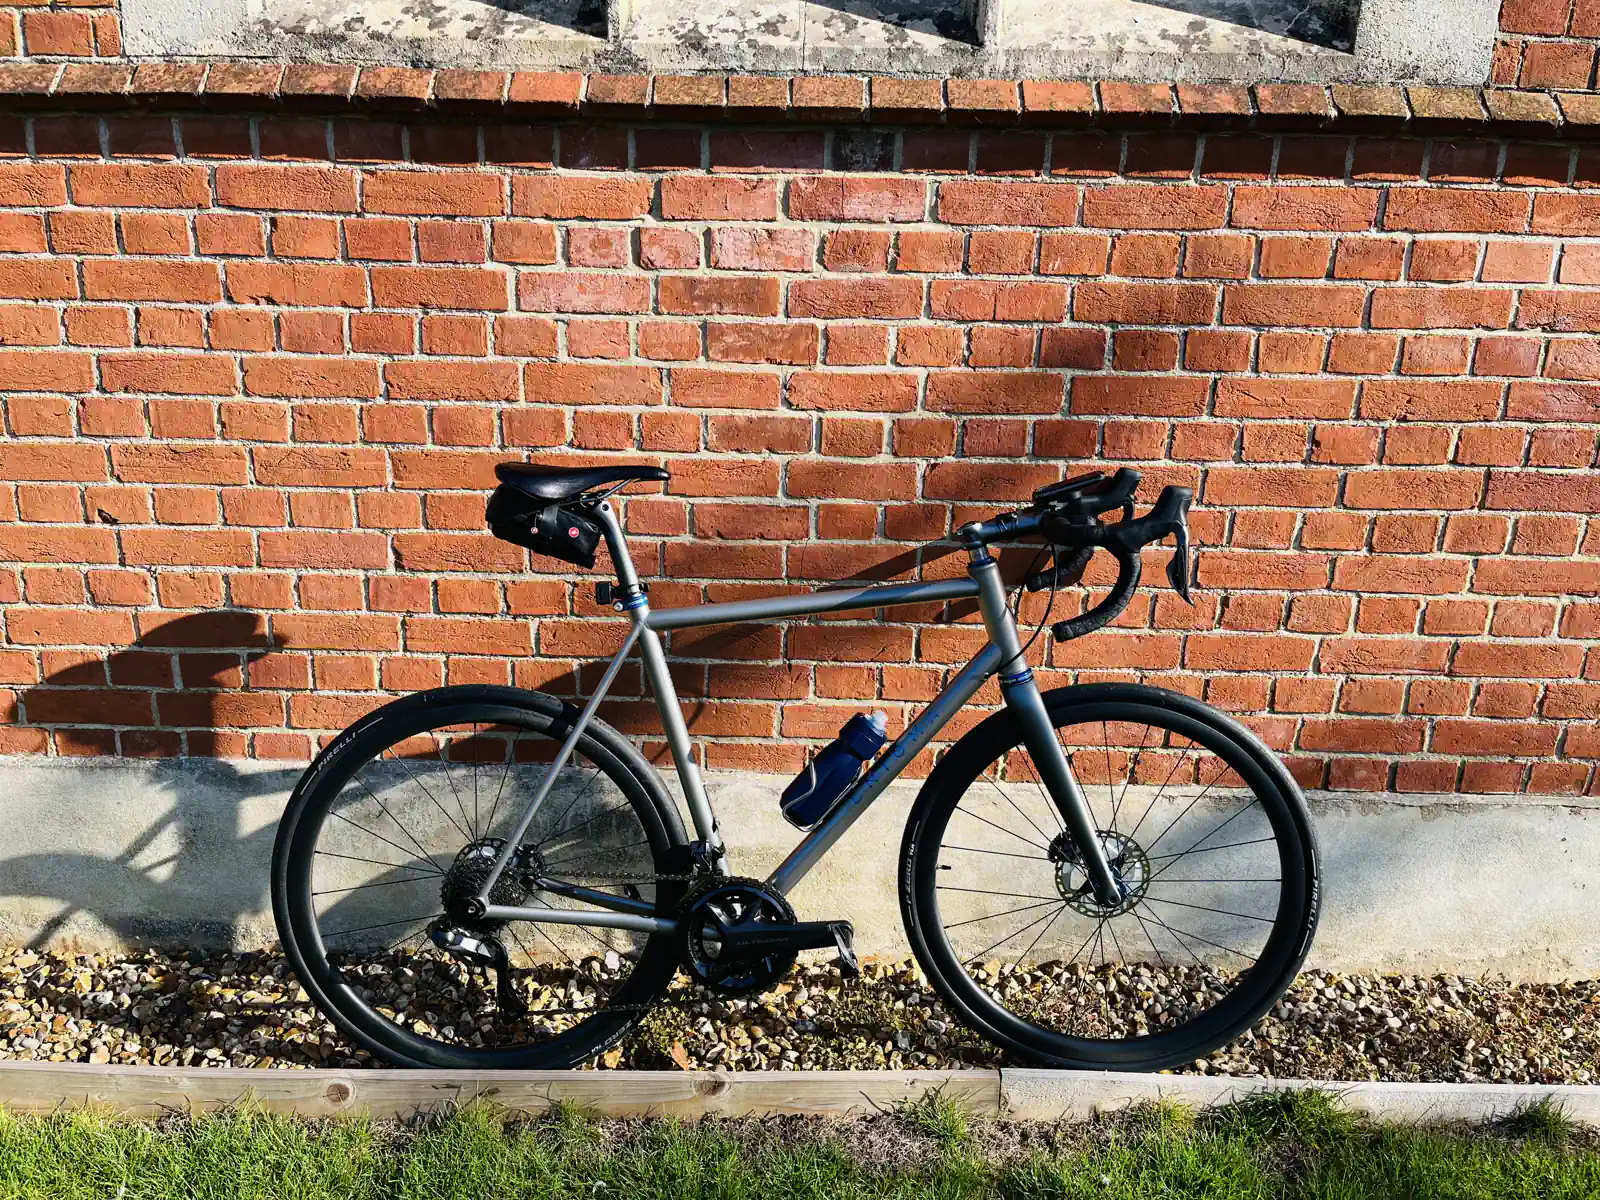 Road bicycle leaning against a brick wall in the sunlight.